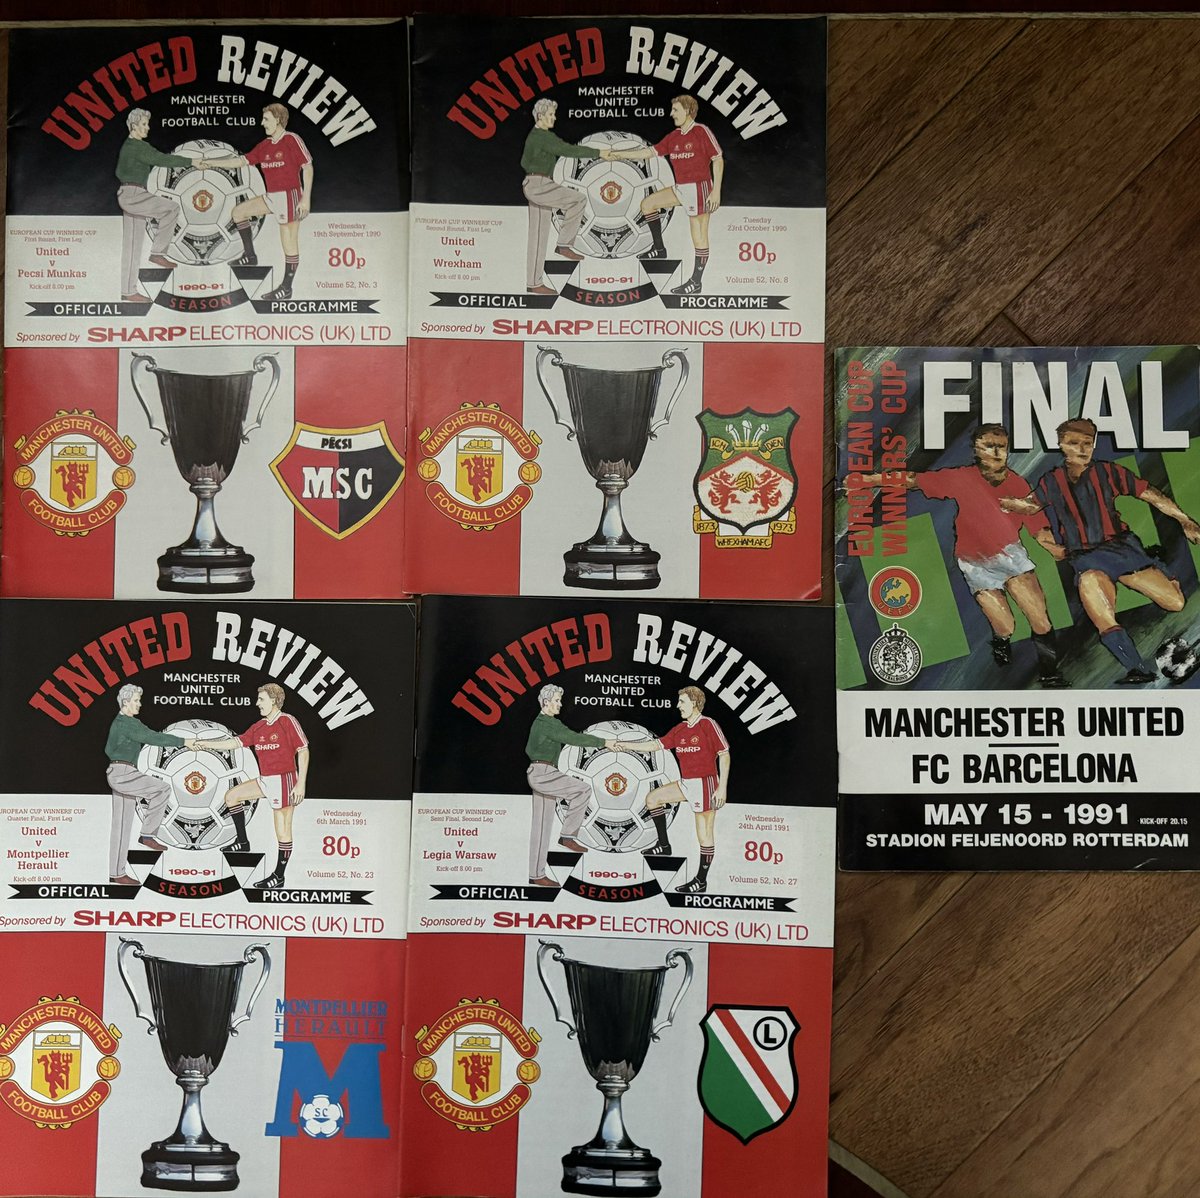 Manchester United Sets.
1967/68 European Cup Winners - all 4 home European Cup Programmes & Final Programme.  £10 for the Set.
1990/91 ECWC Winners - all 4 home ECWC Programmes & Final Programme. £10 for the Set.
Excluding Postage Cost.